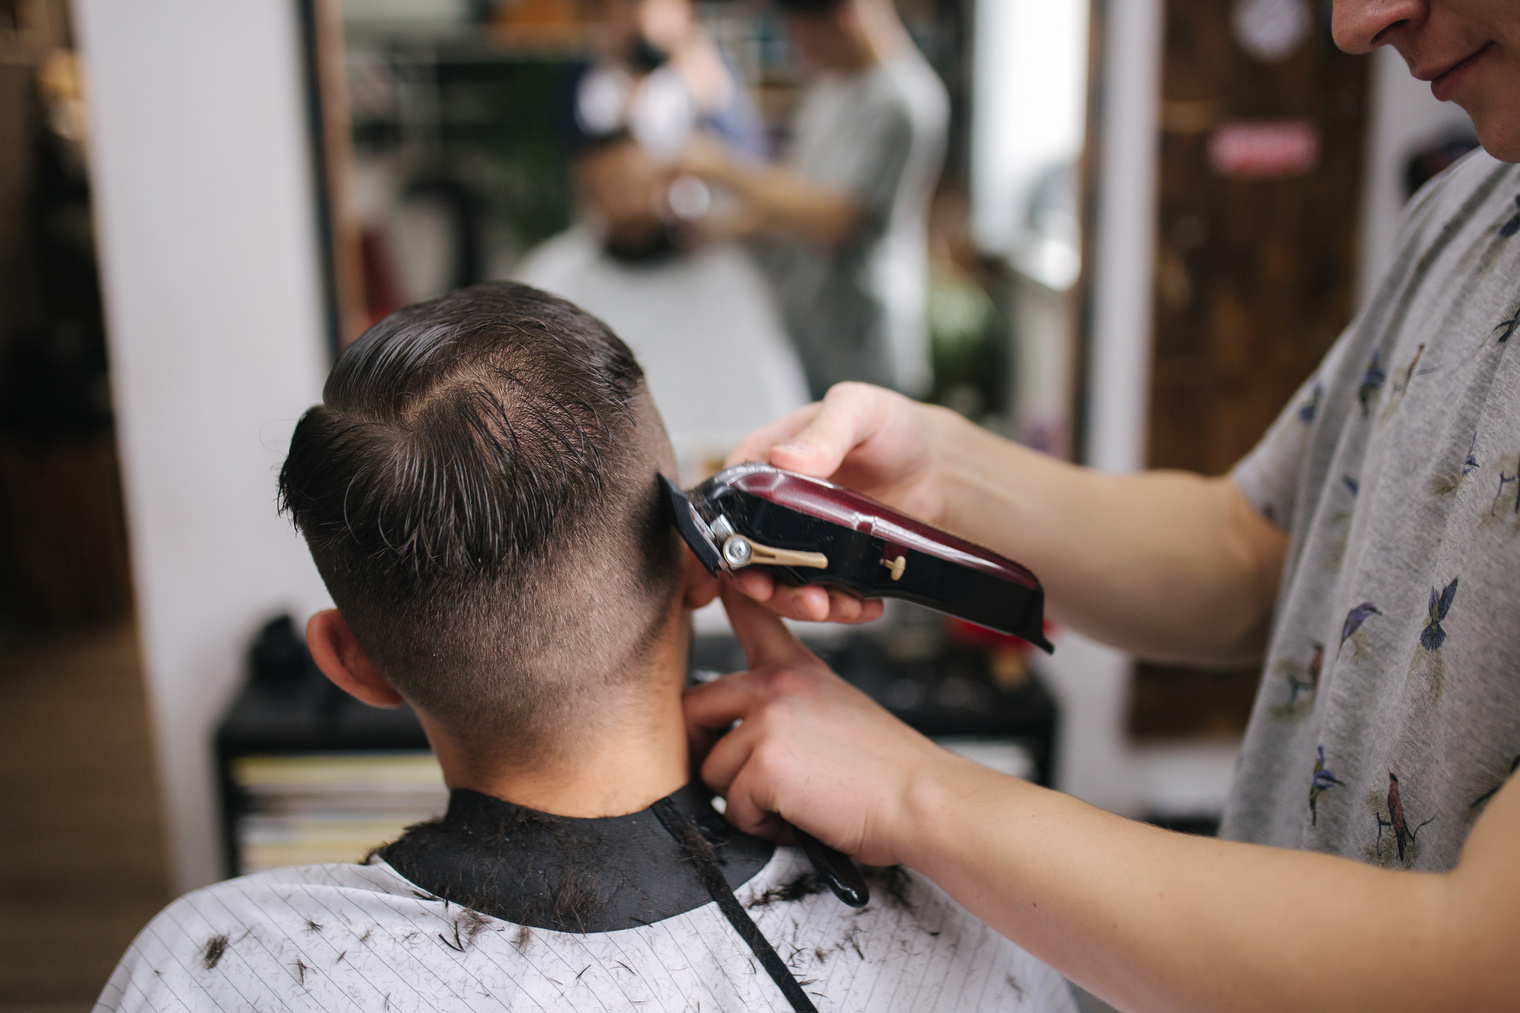 Back view of Men in beauty salon. Men's haircut in a barbershop. New haircut style 2021. Professional hairdresser uses a hair clipper for fringing hair